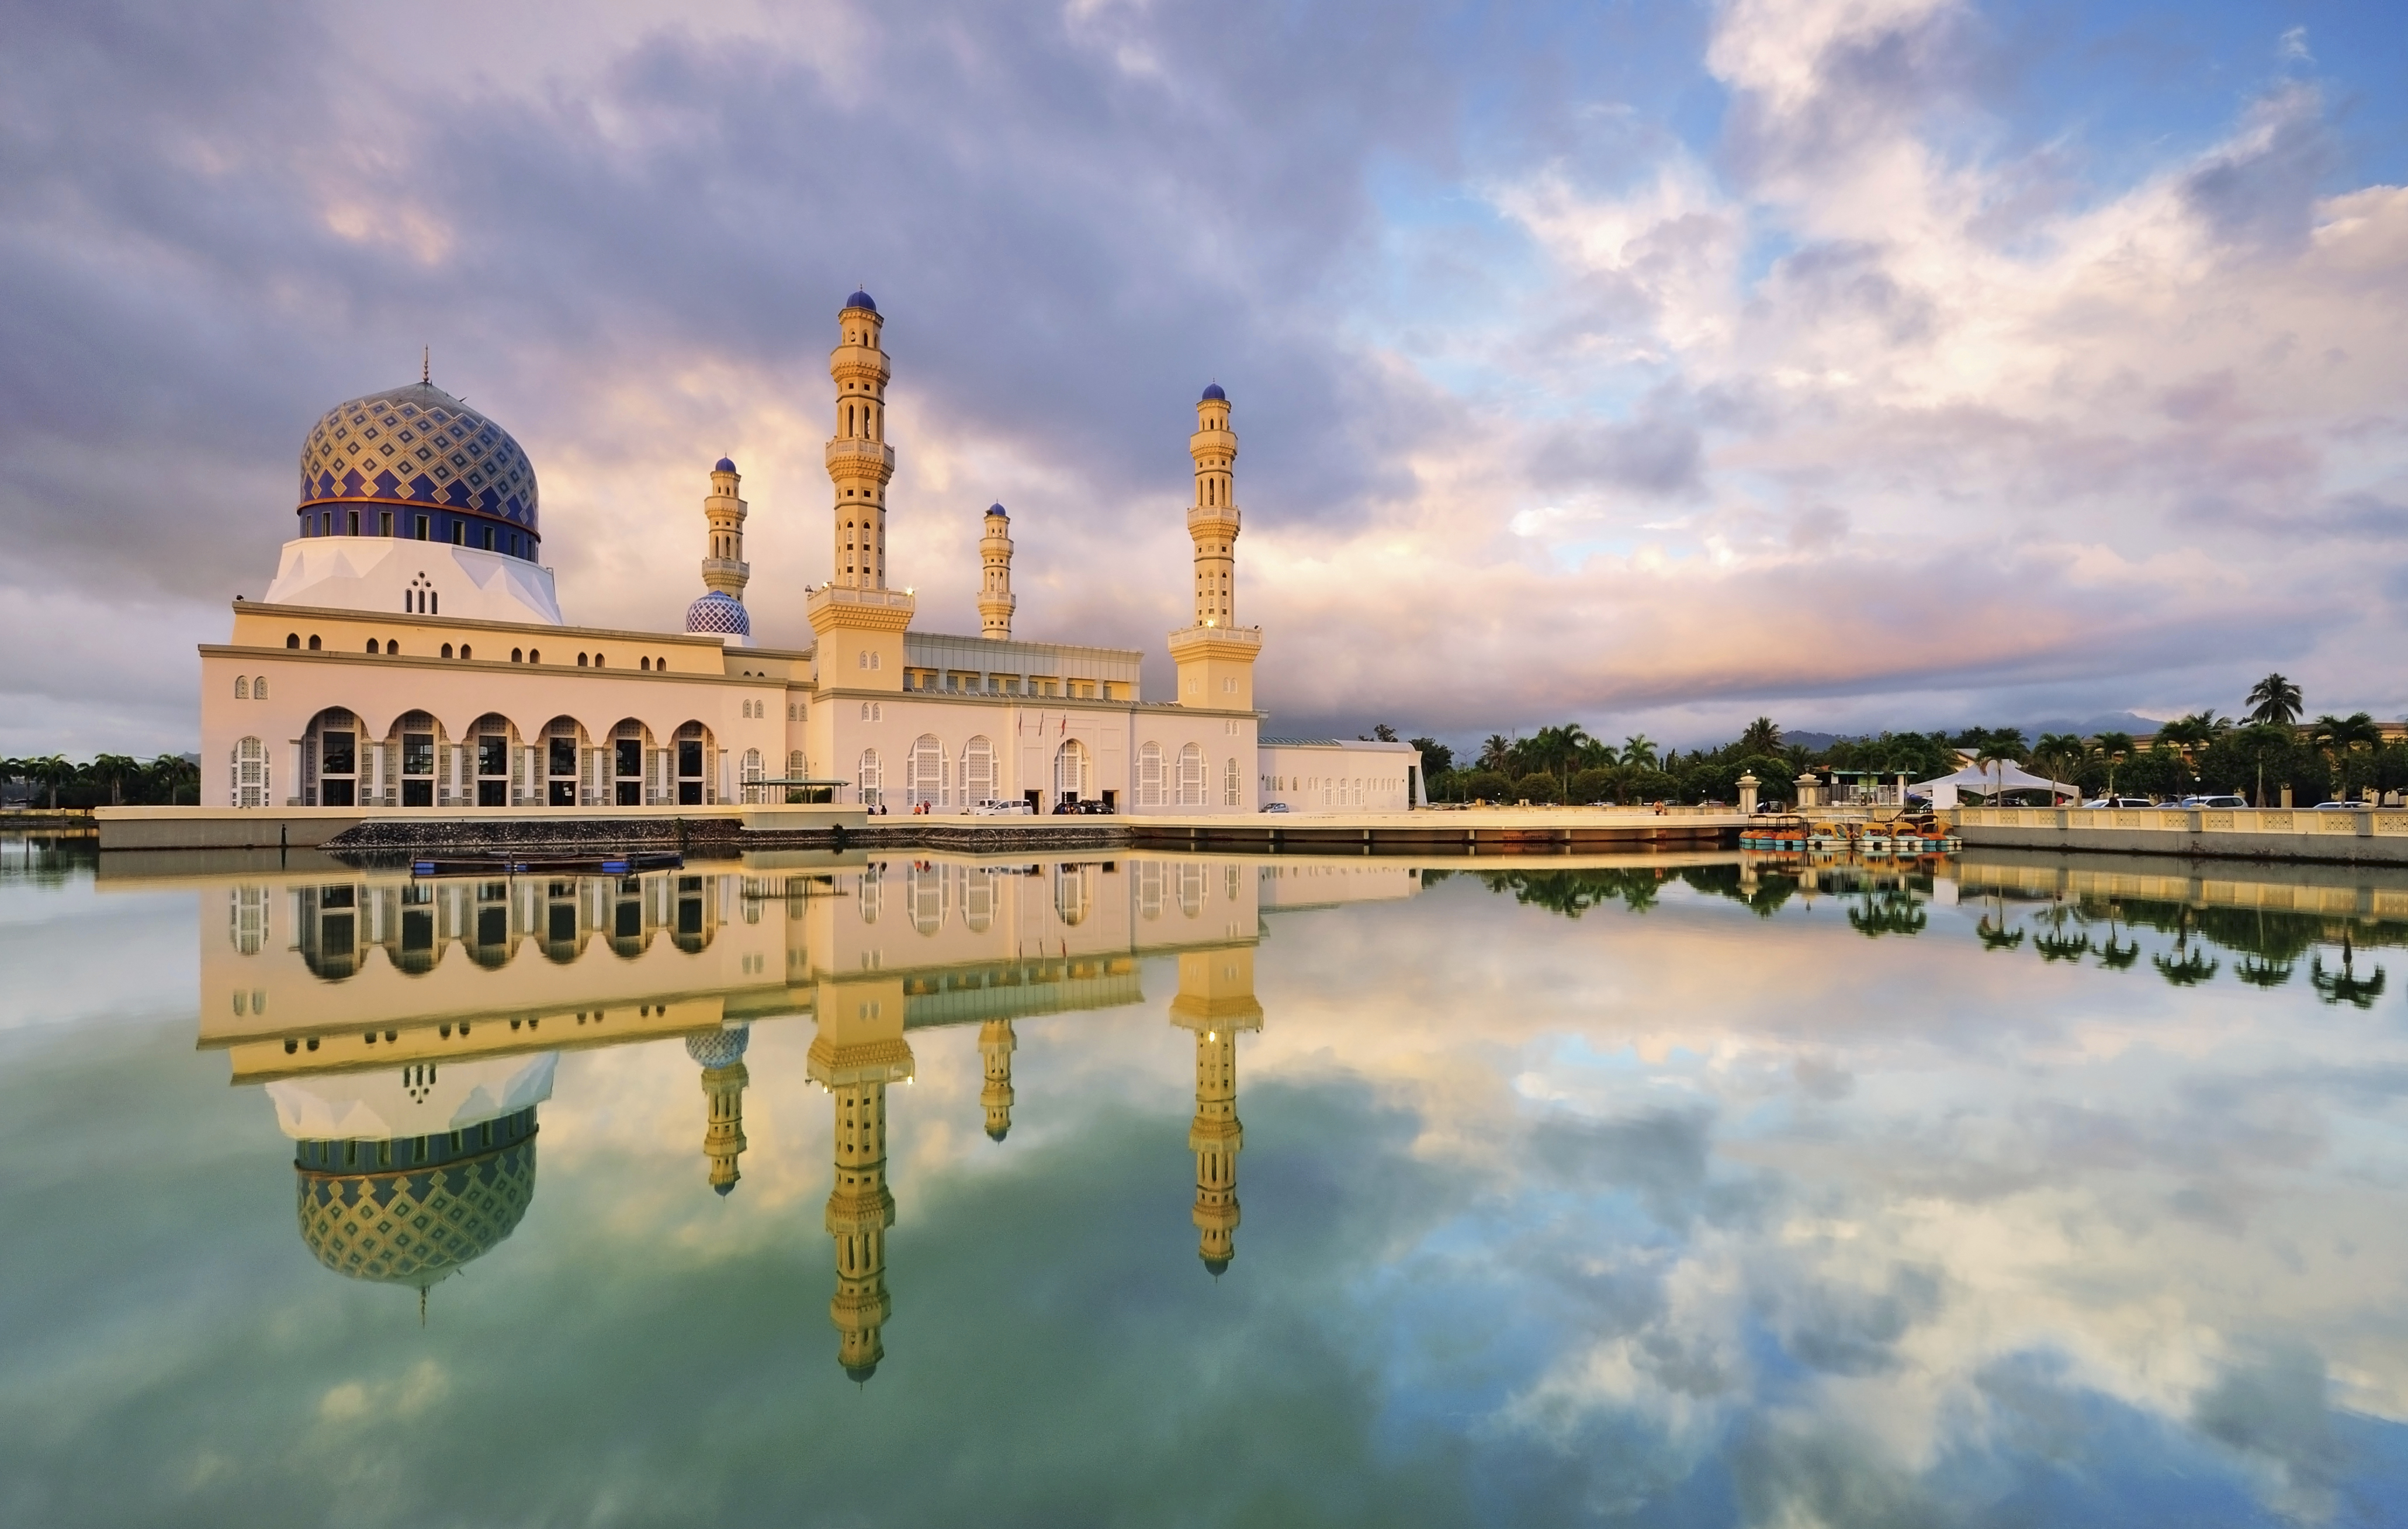 City Mosque | Kota Kinabalu, Malaysia Attractions - Lonely Planet